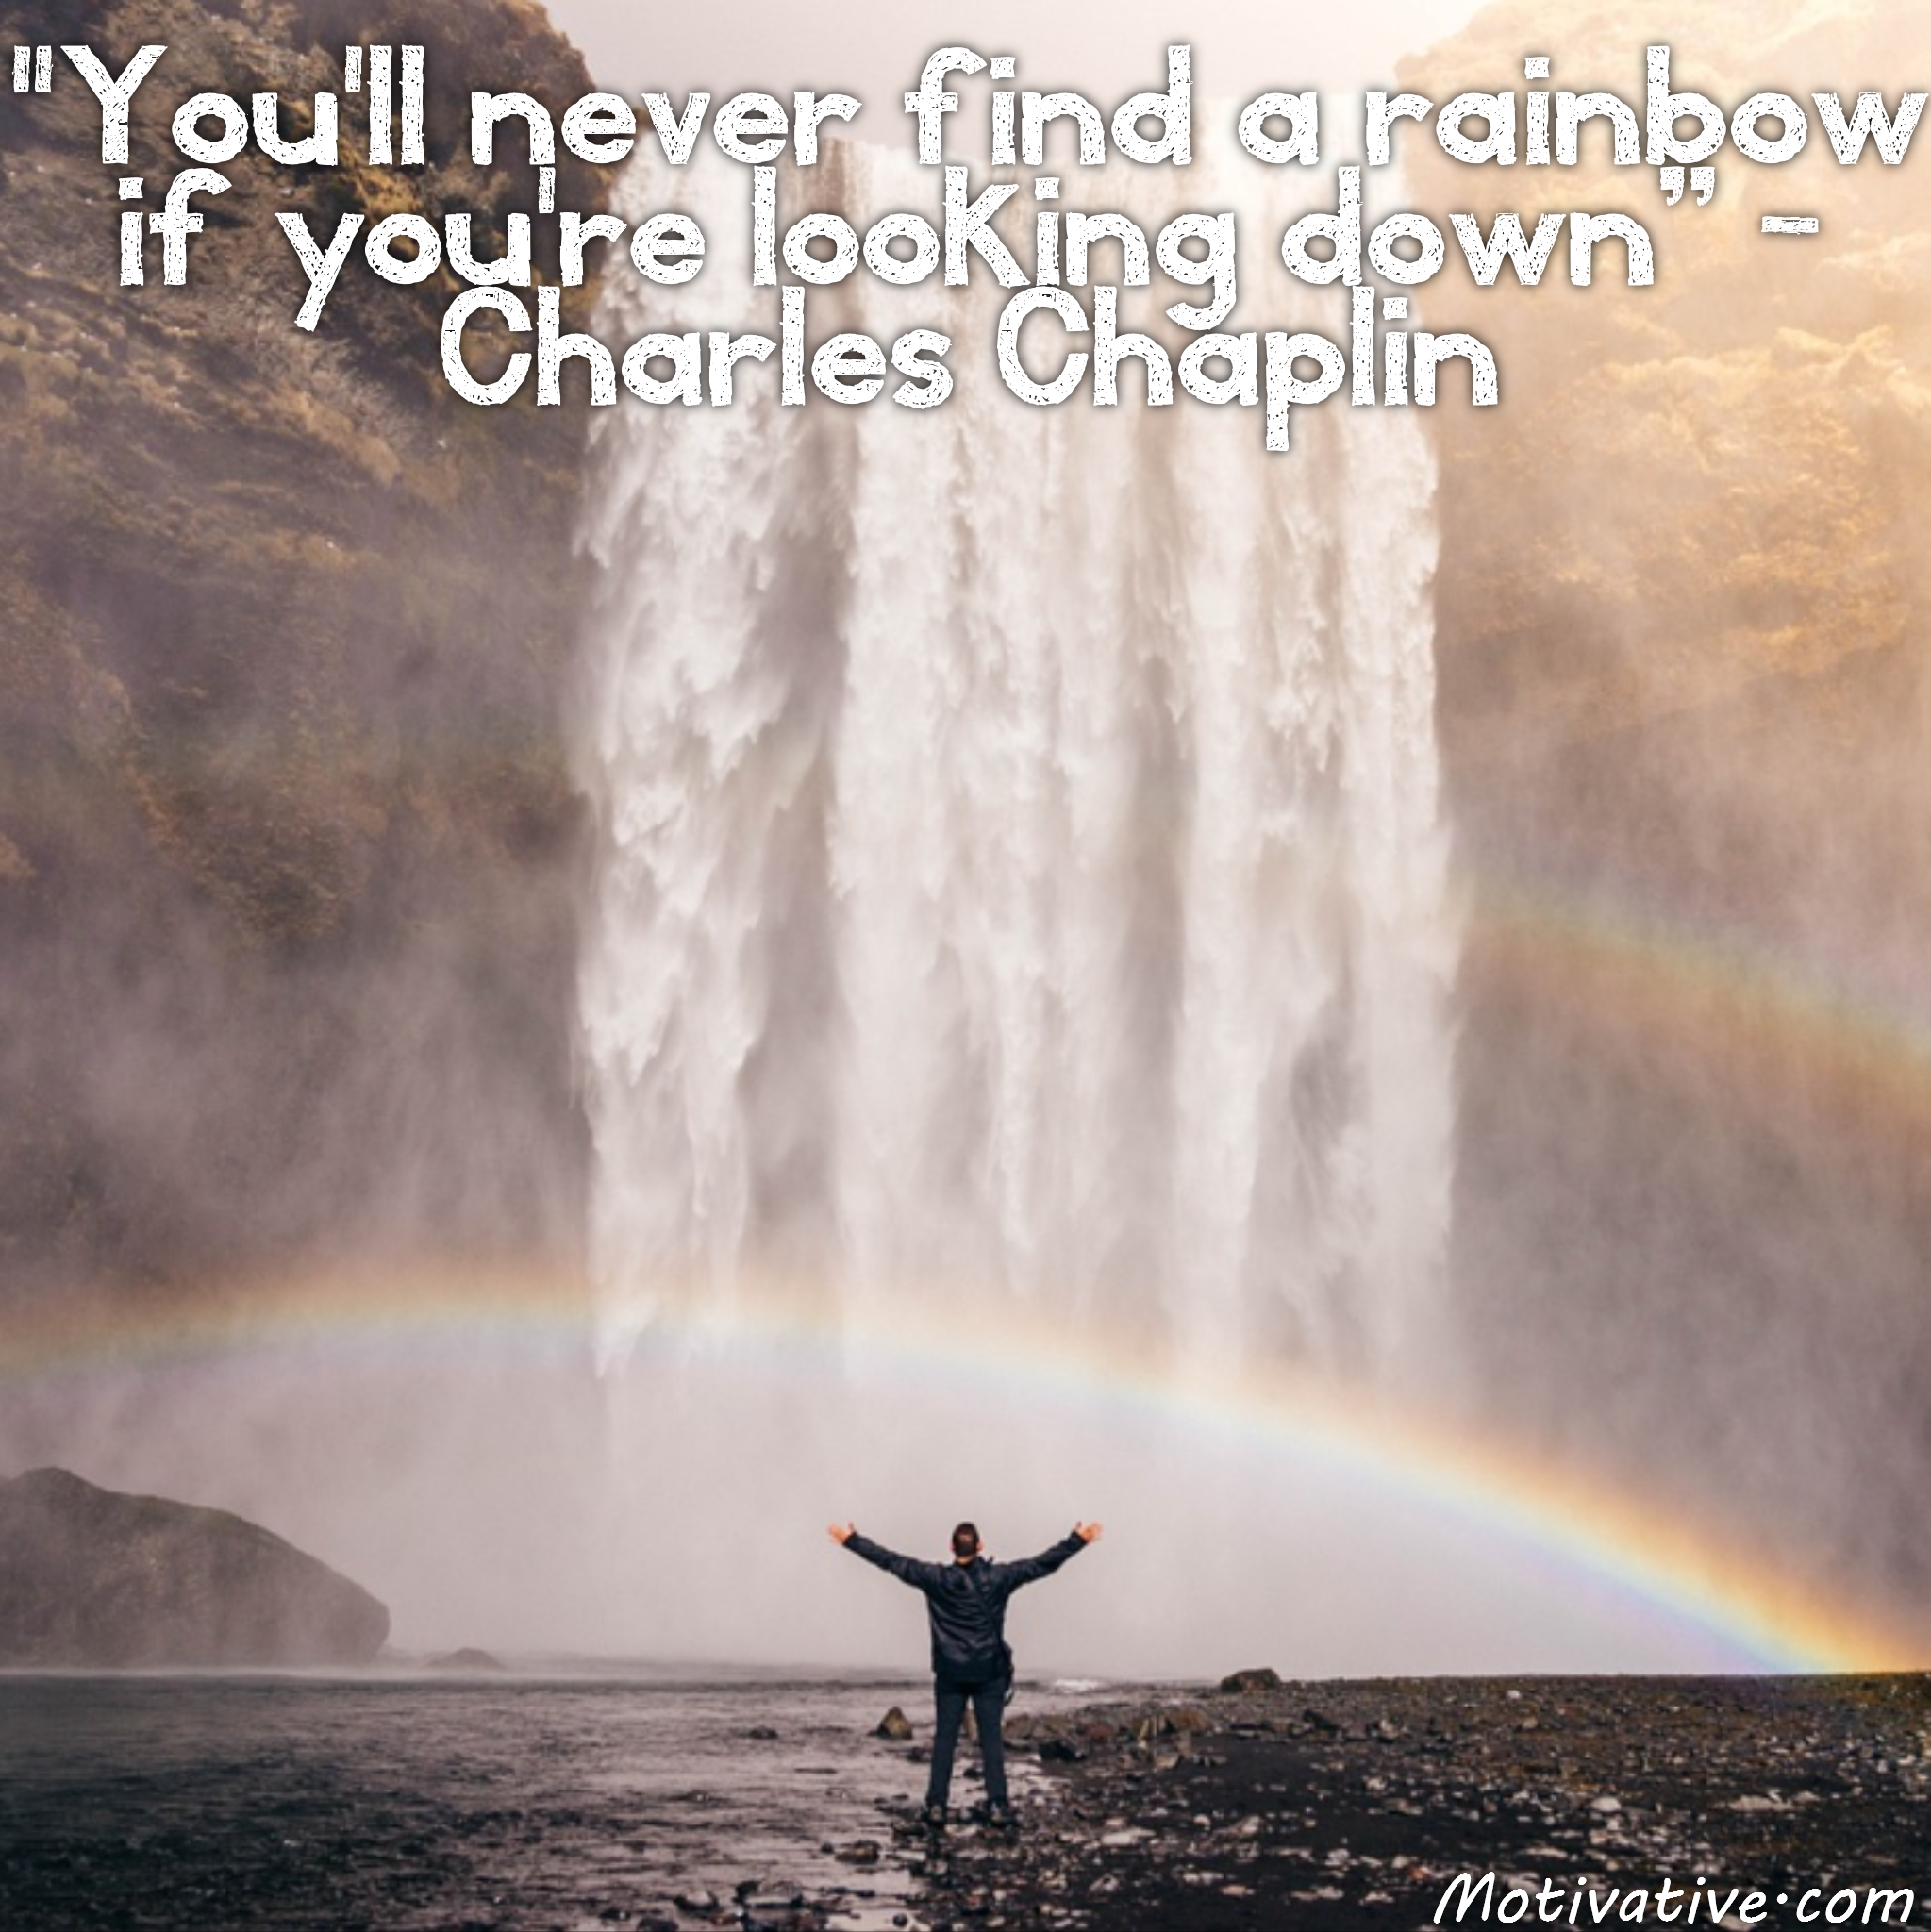 You’ll never find a rainbow if you’re looking down – Charles Chaplin